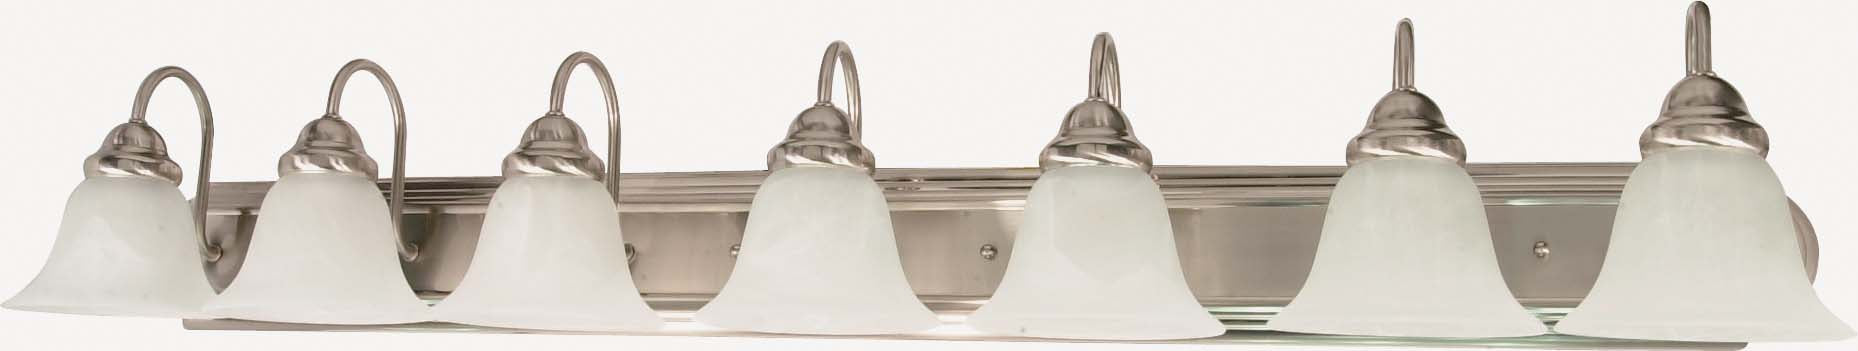 SATCO/NUVO Ballerina 7-Light 48 Inch Vanity With Alabaster Glass Bell Shades (60-291)